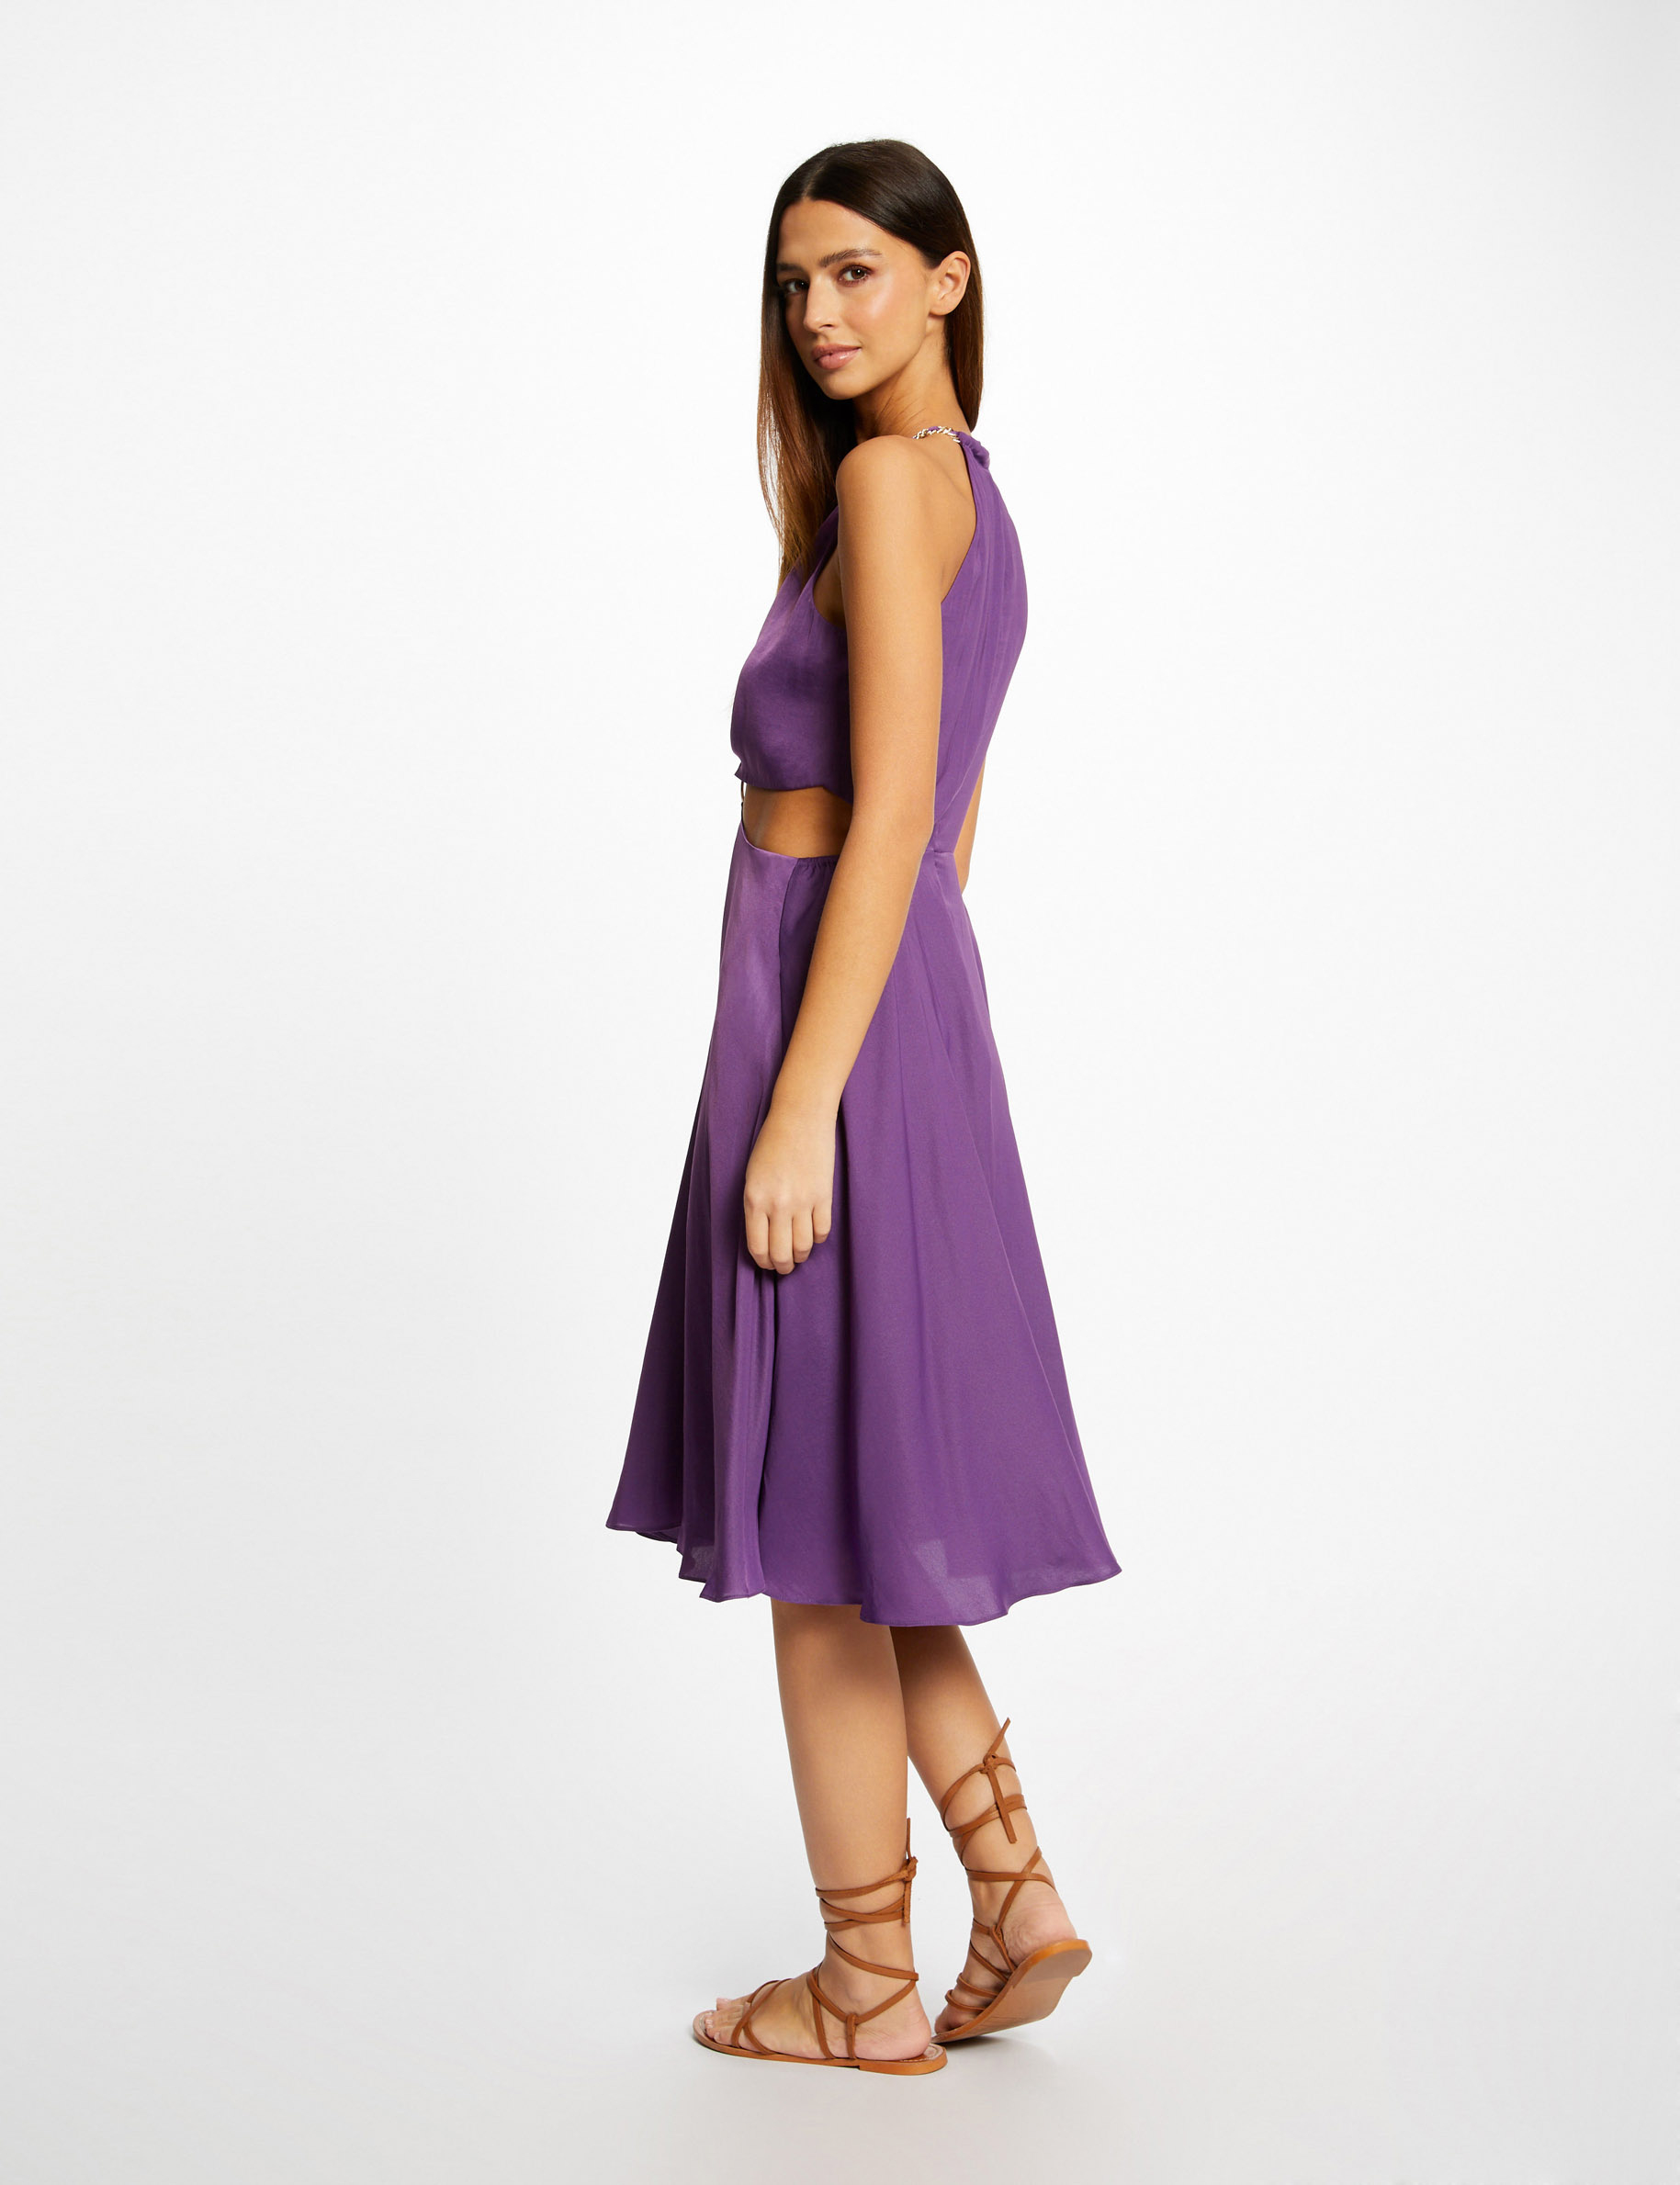 A-line dress with ring and openings dark purple ladies'